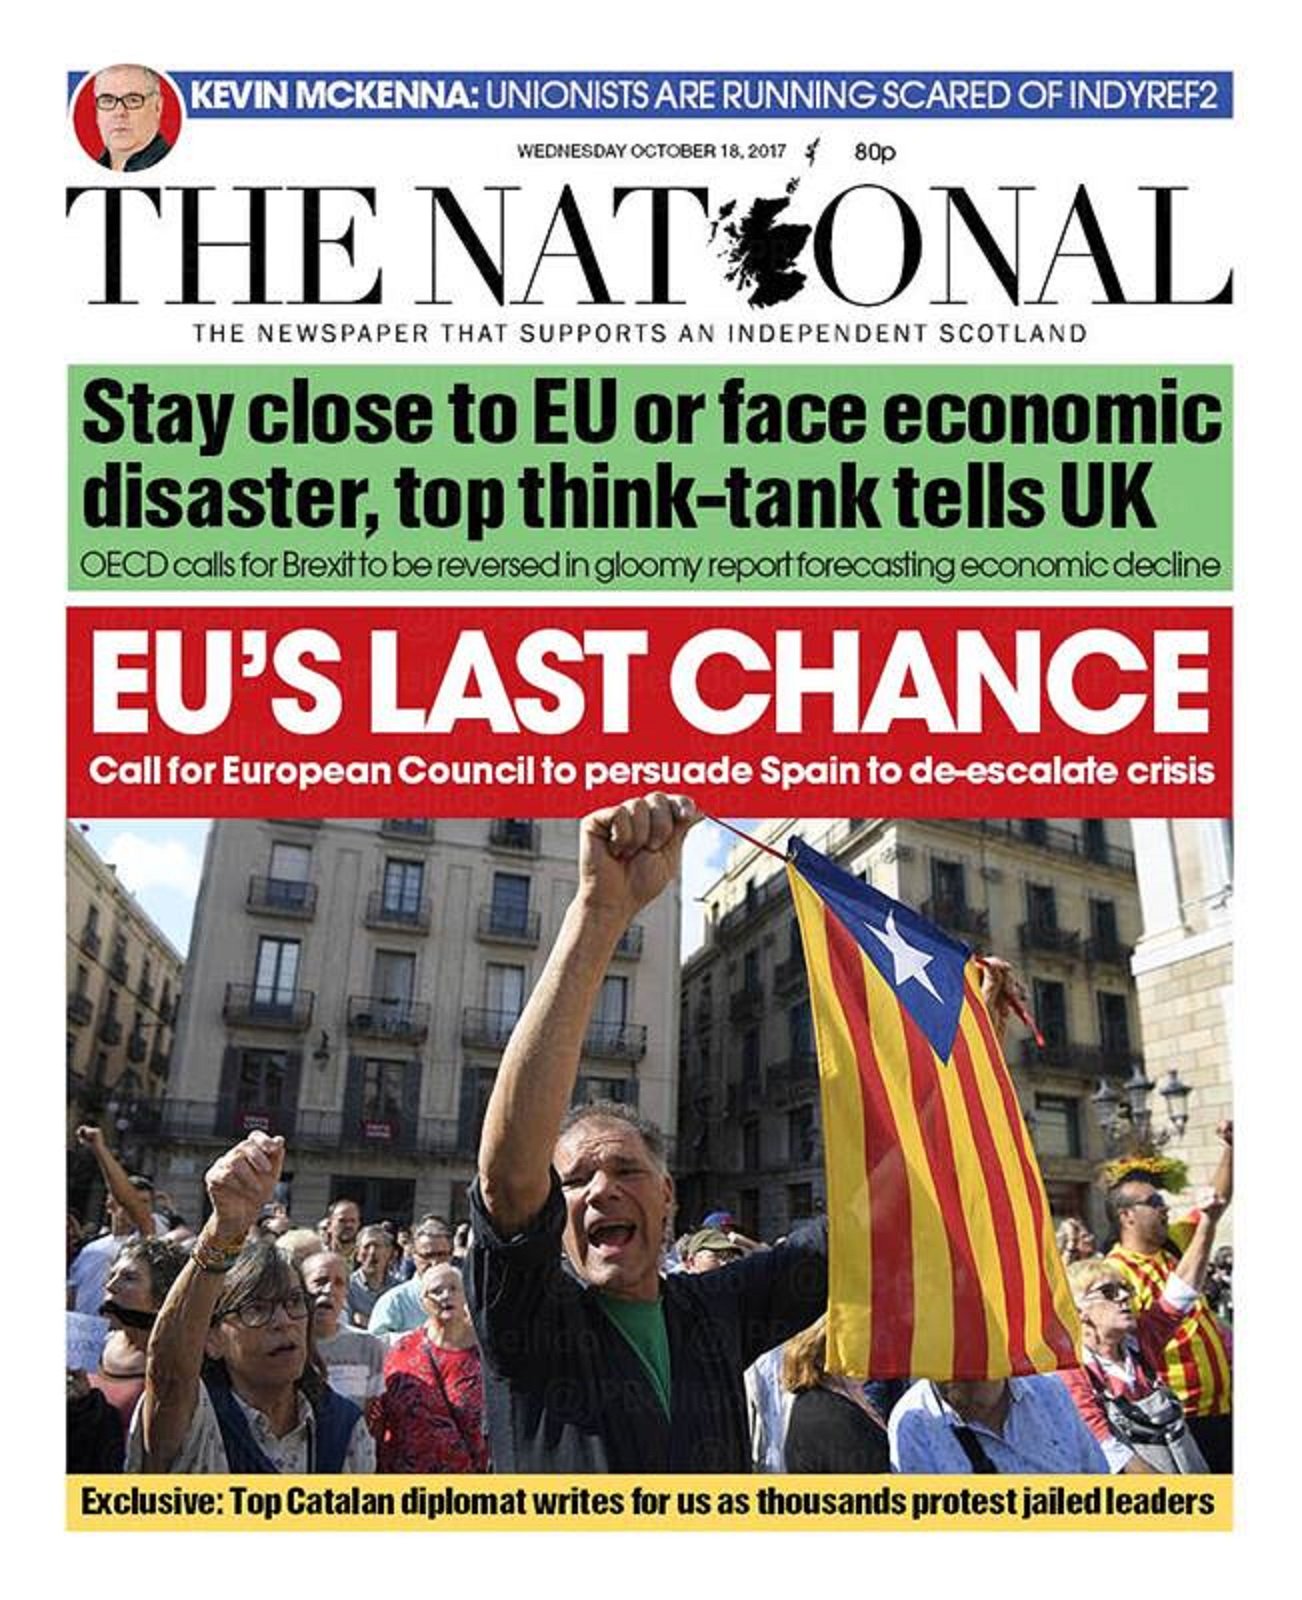 'The National' front page: "EU's last chance" over Catalonia